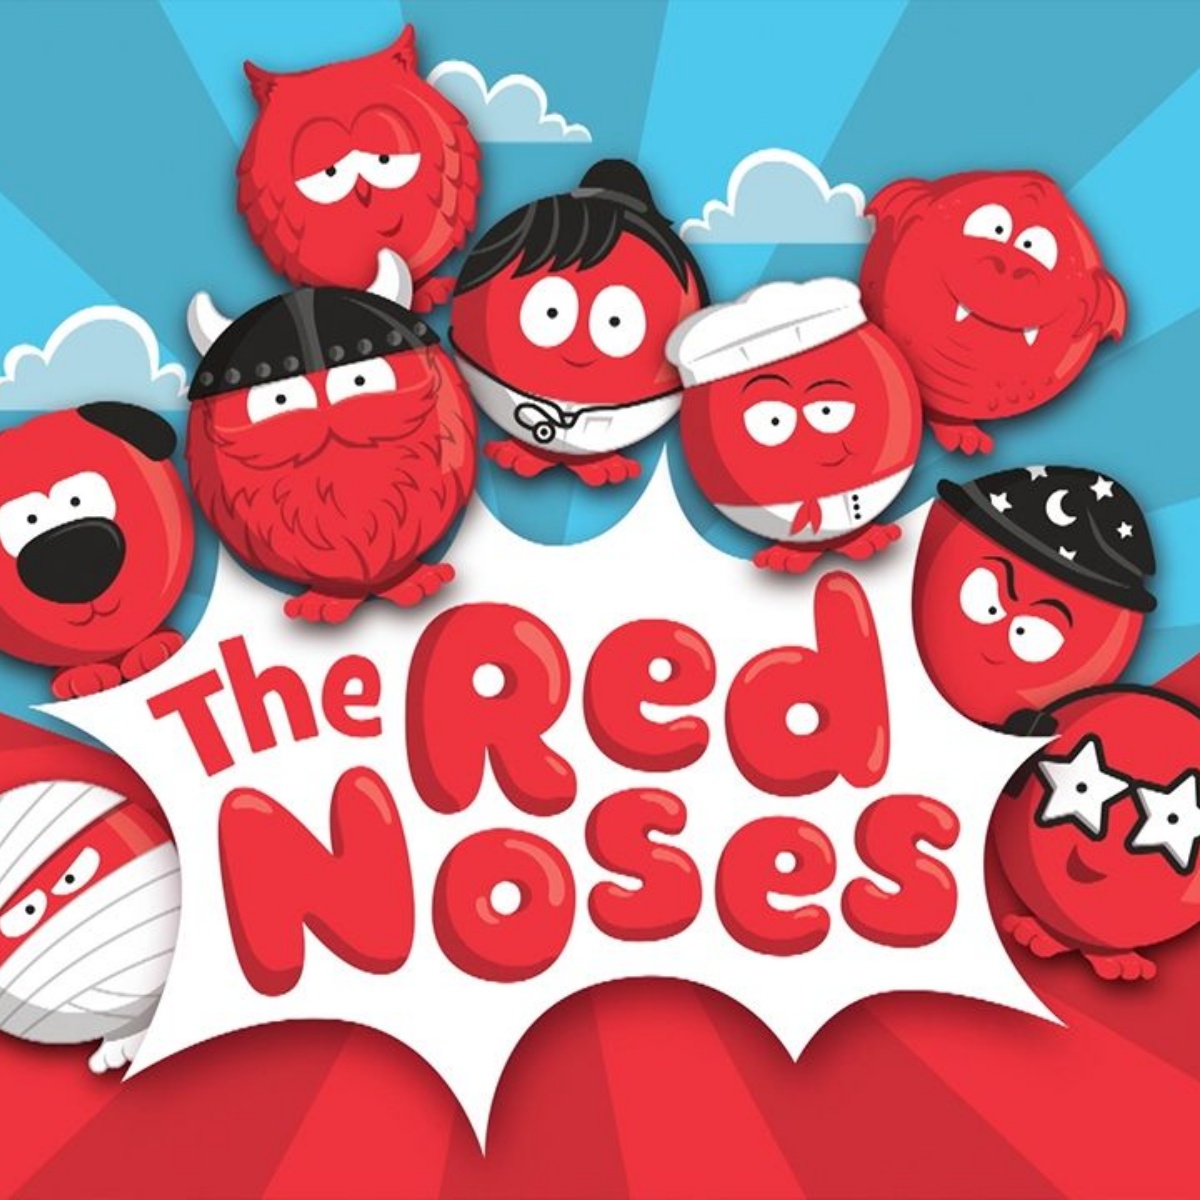 South Lake Primary School Red Nose Day next Friday 15th March